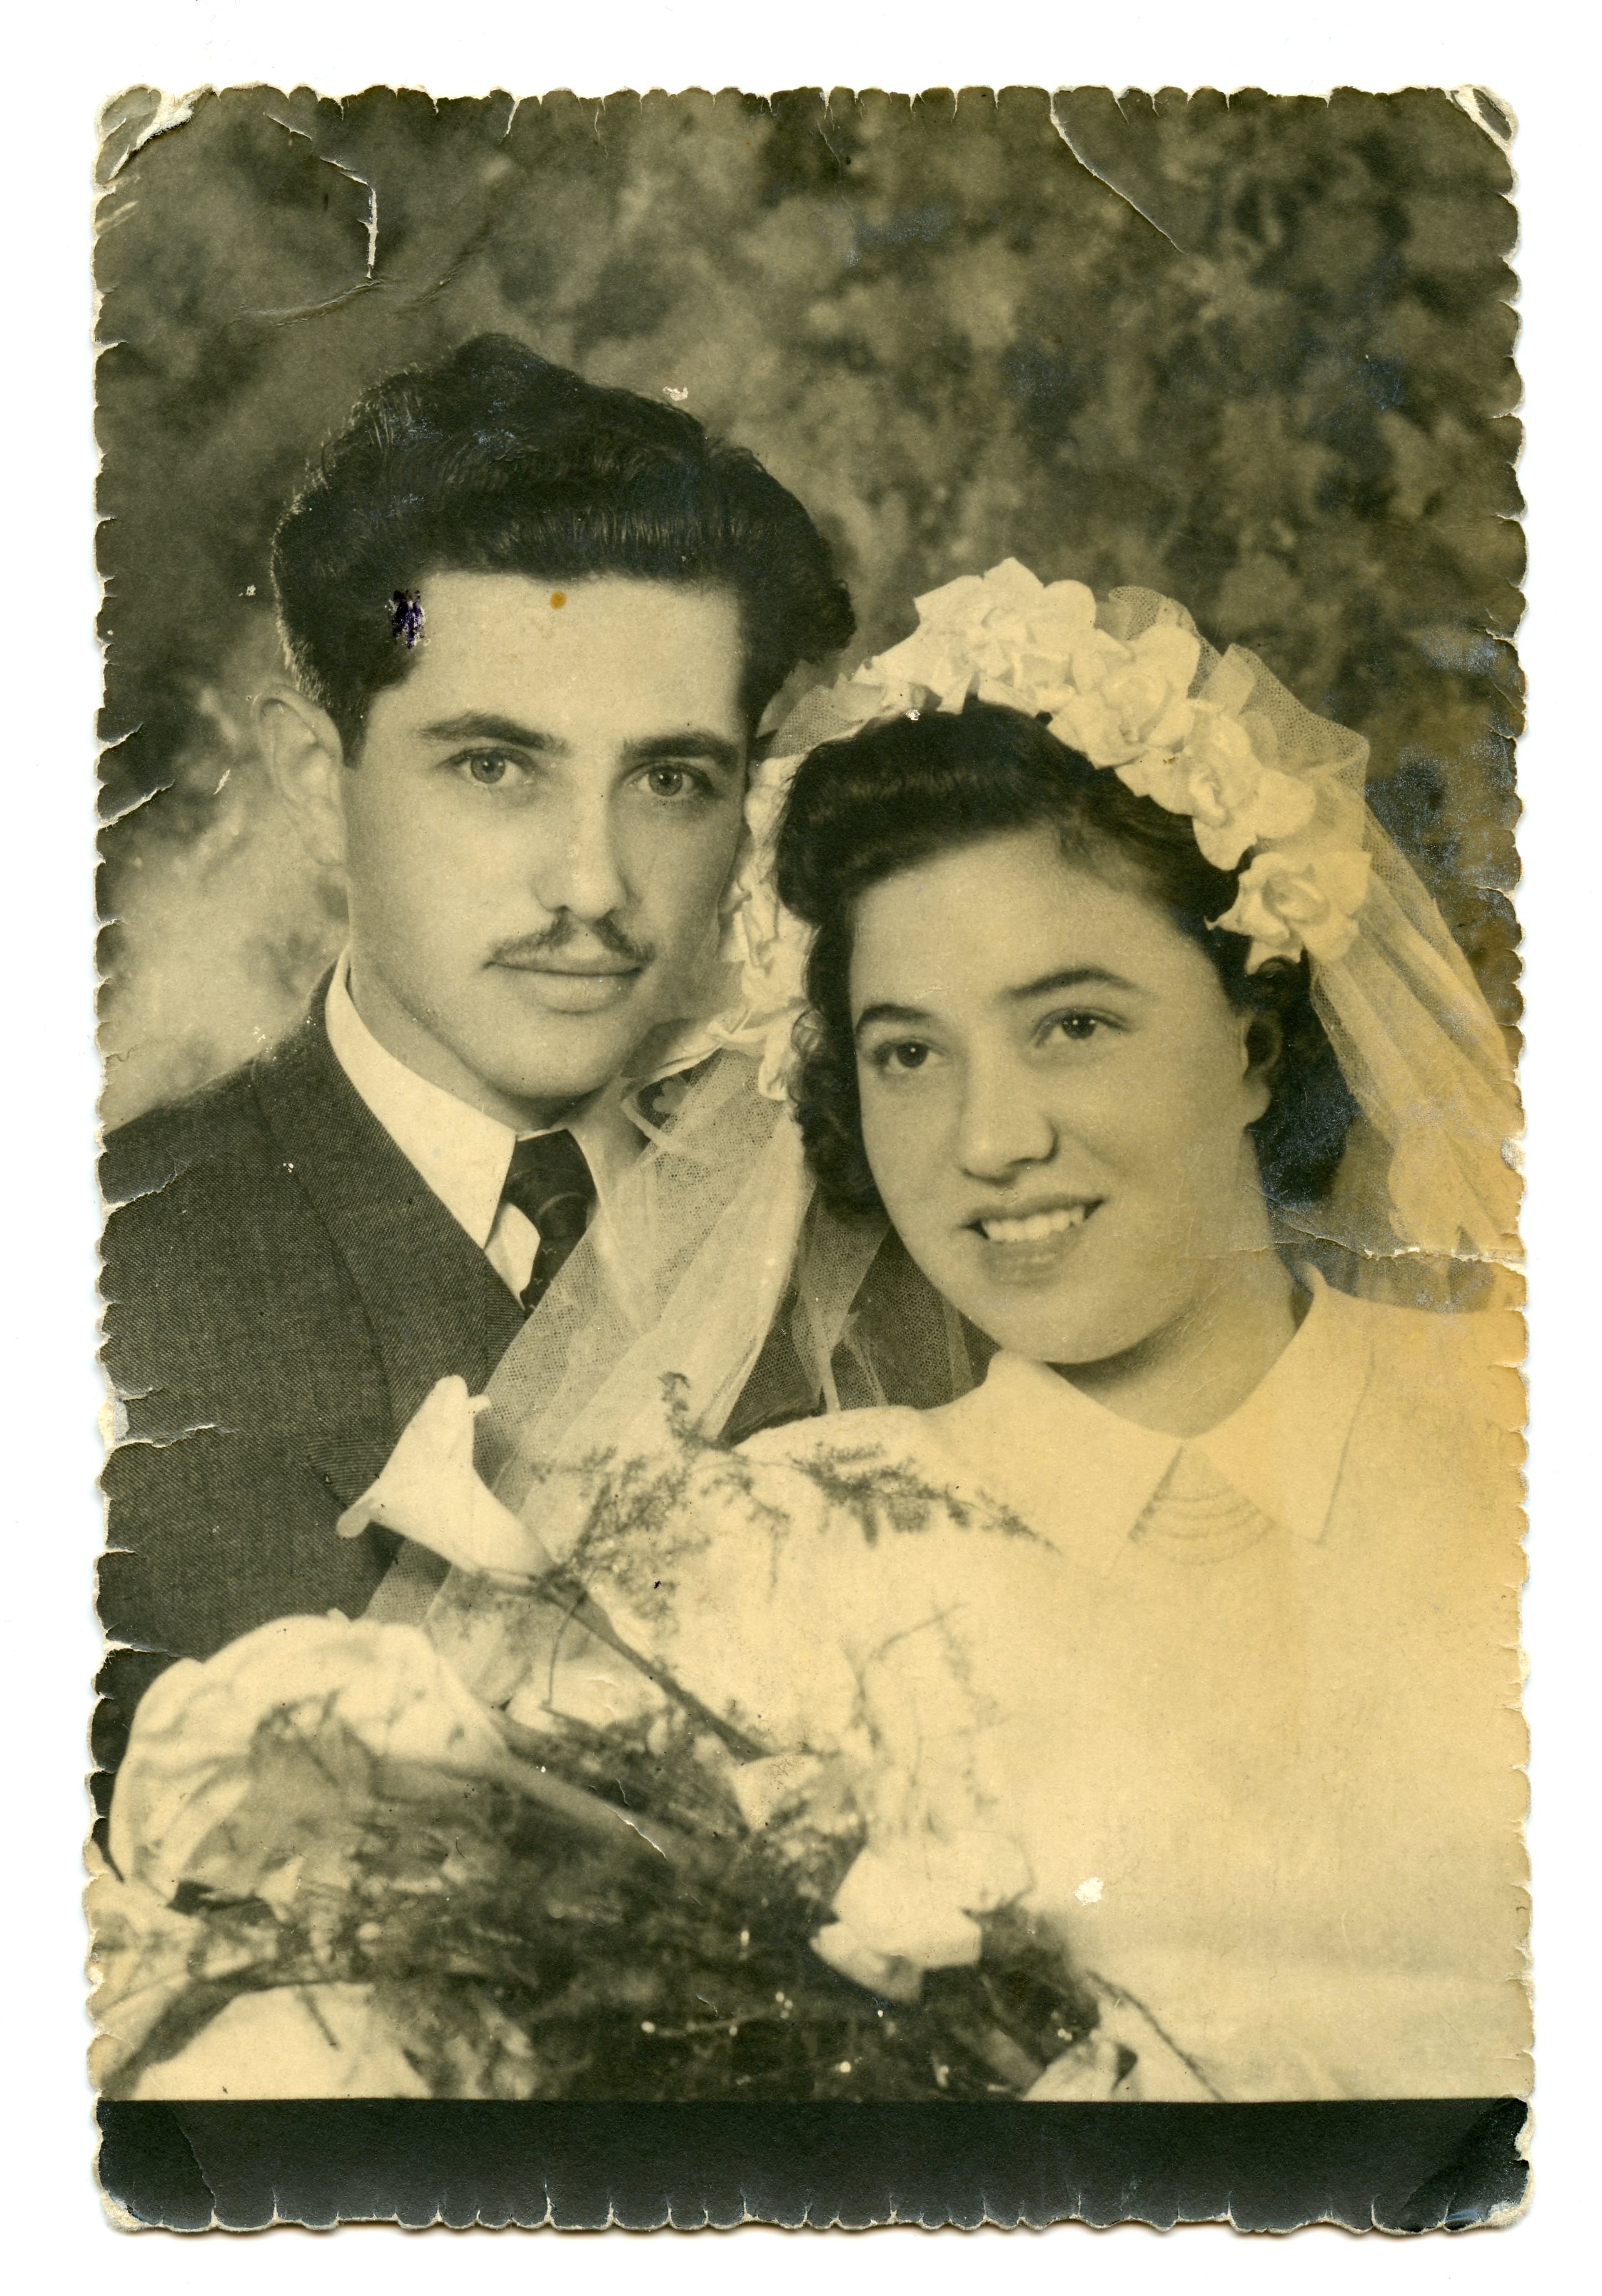 February 19, 1952 Aron (21) and Cipora (18) married in Beit Shan, Israel